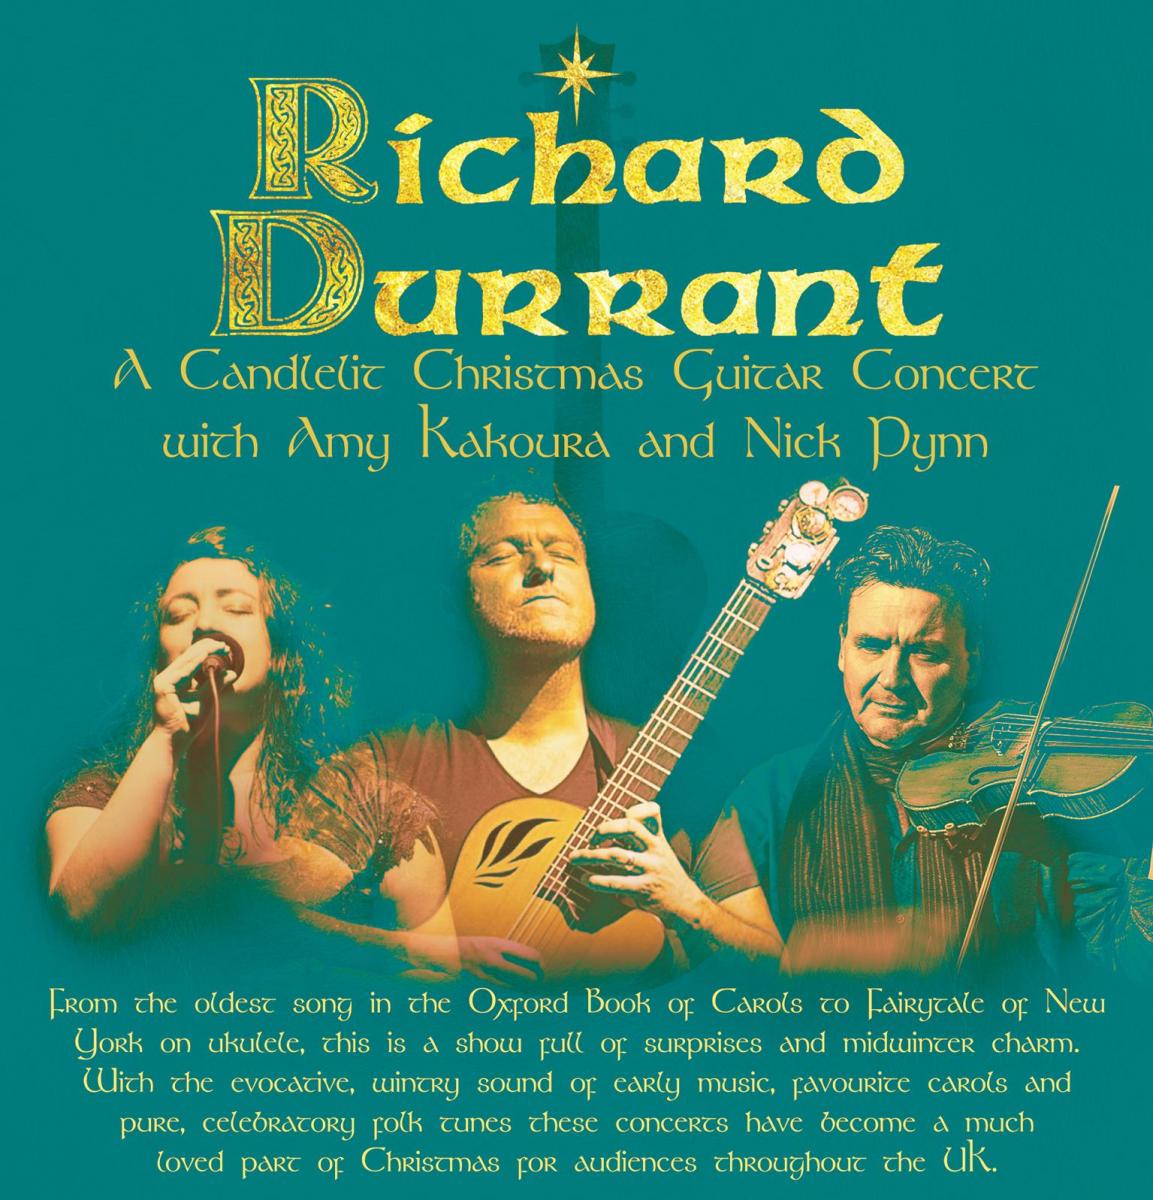 Richard Durrant to perform a candlelit Christmas concert